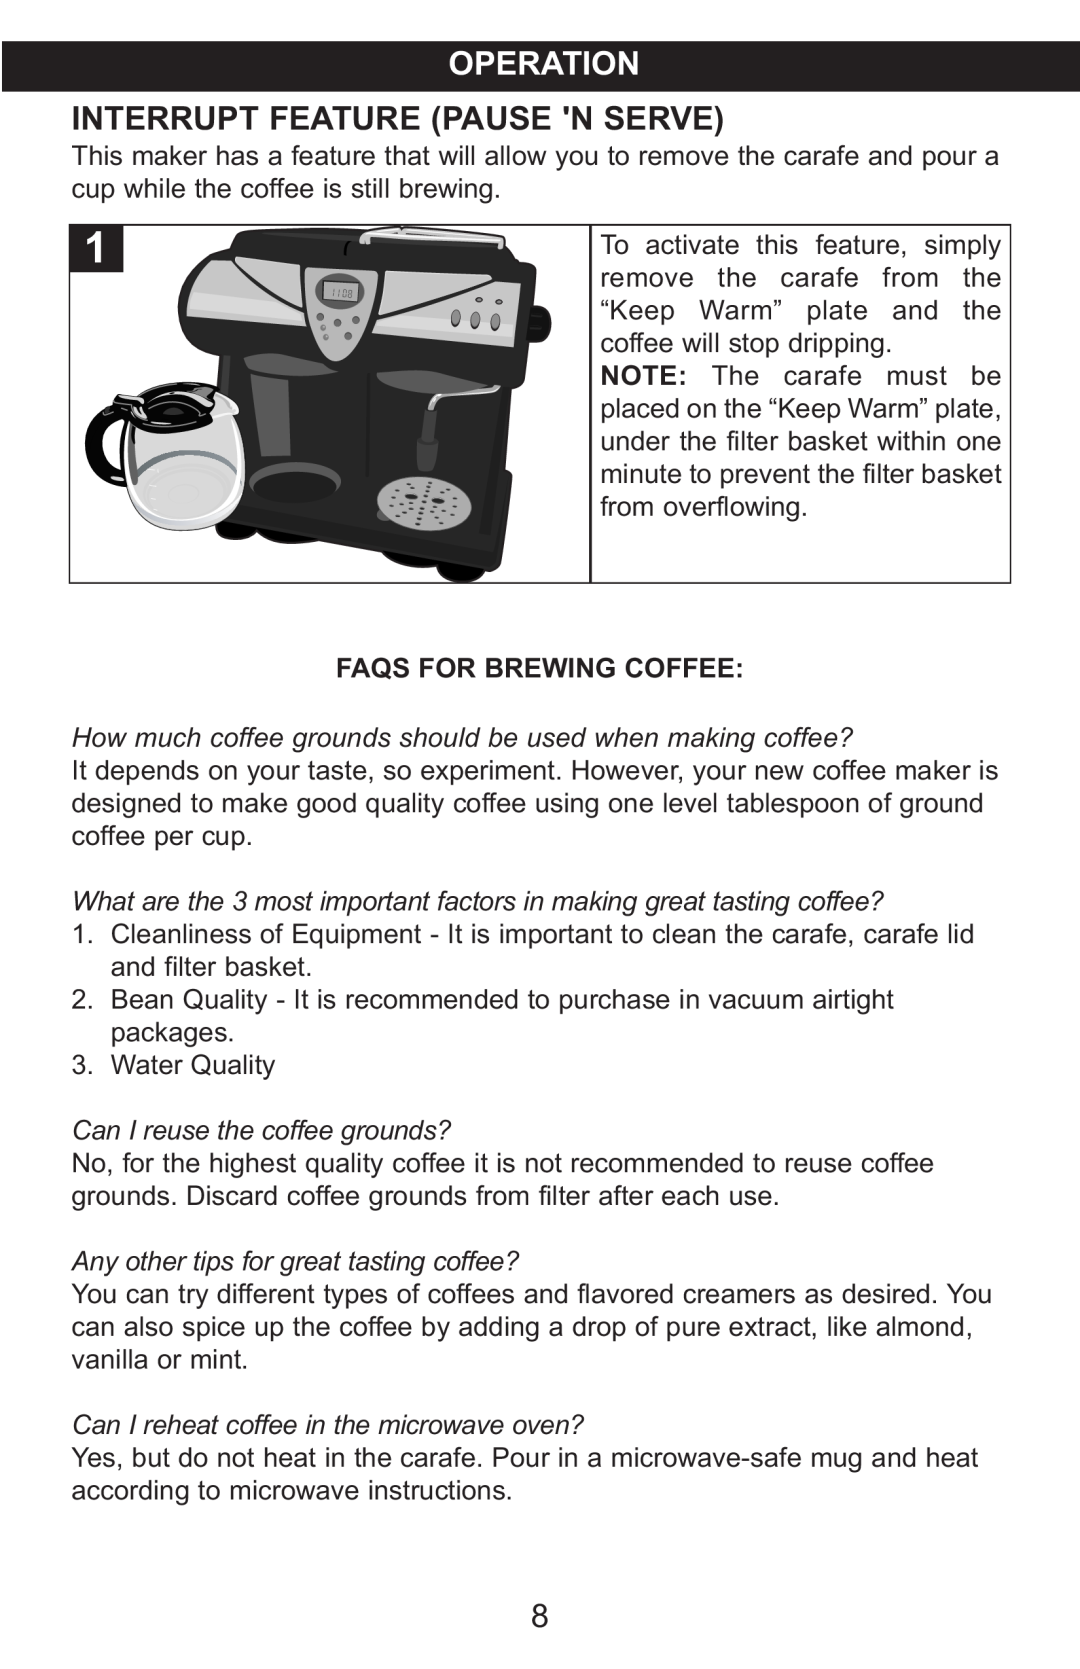 Emerson CCM901 manual Interrupt Feature Pause N Serve, Operation, Faqs For Brewing Coffee, Can I reuse the coffee grounds? 